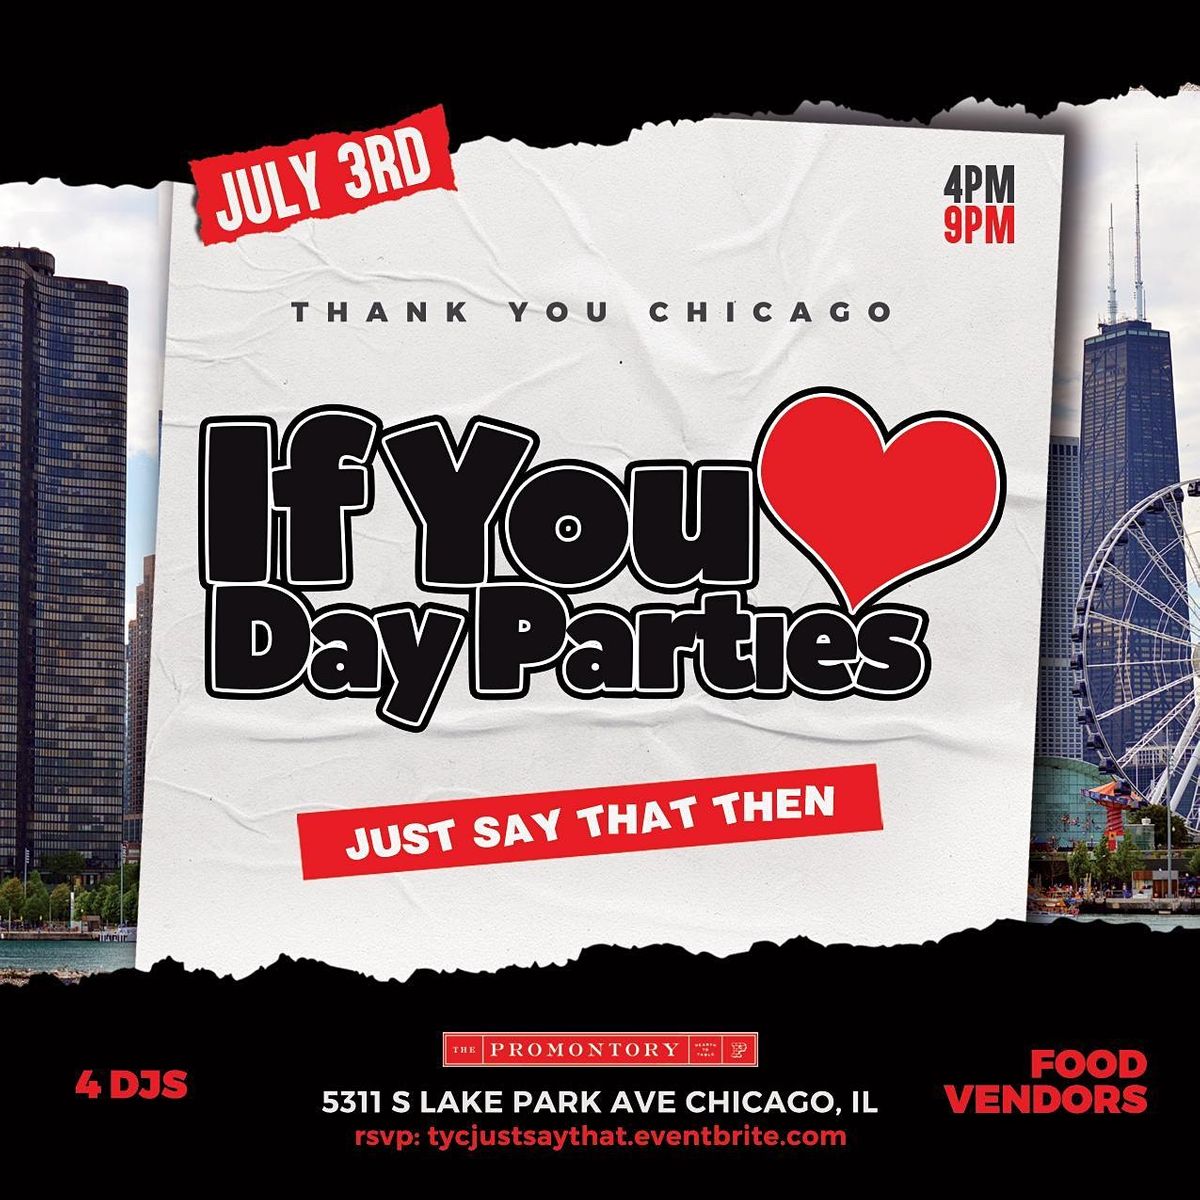 "If You Love Day Parties Then Say That"